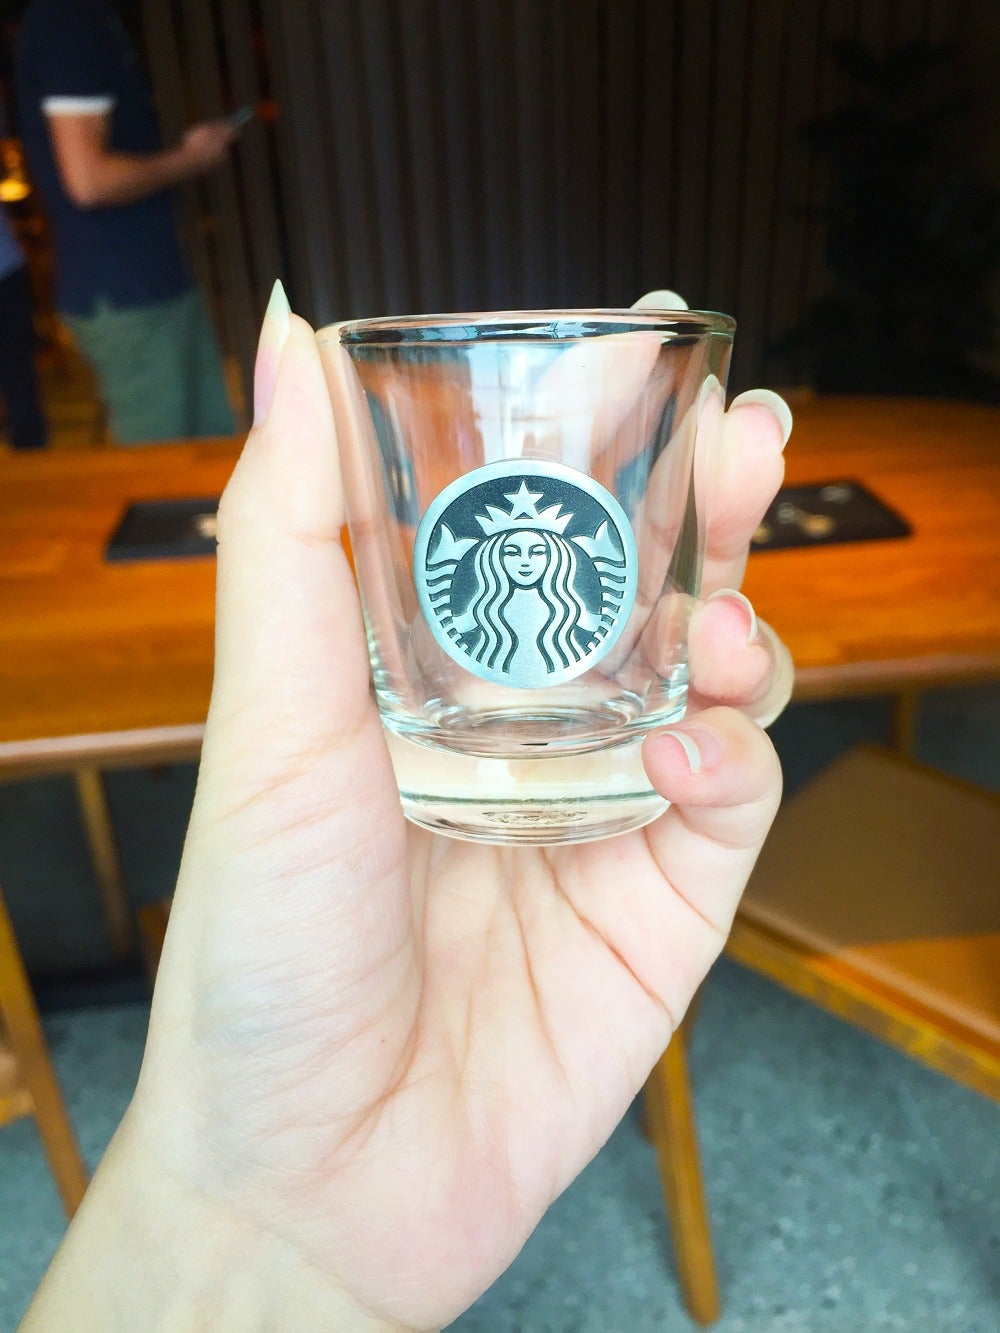 Starbucks x Royal Selangor Collection is Launching on Dec 21 & Looks Super Exquisite! - WORLD OF BUZZ 7